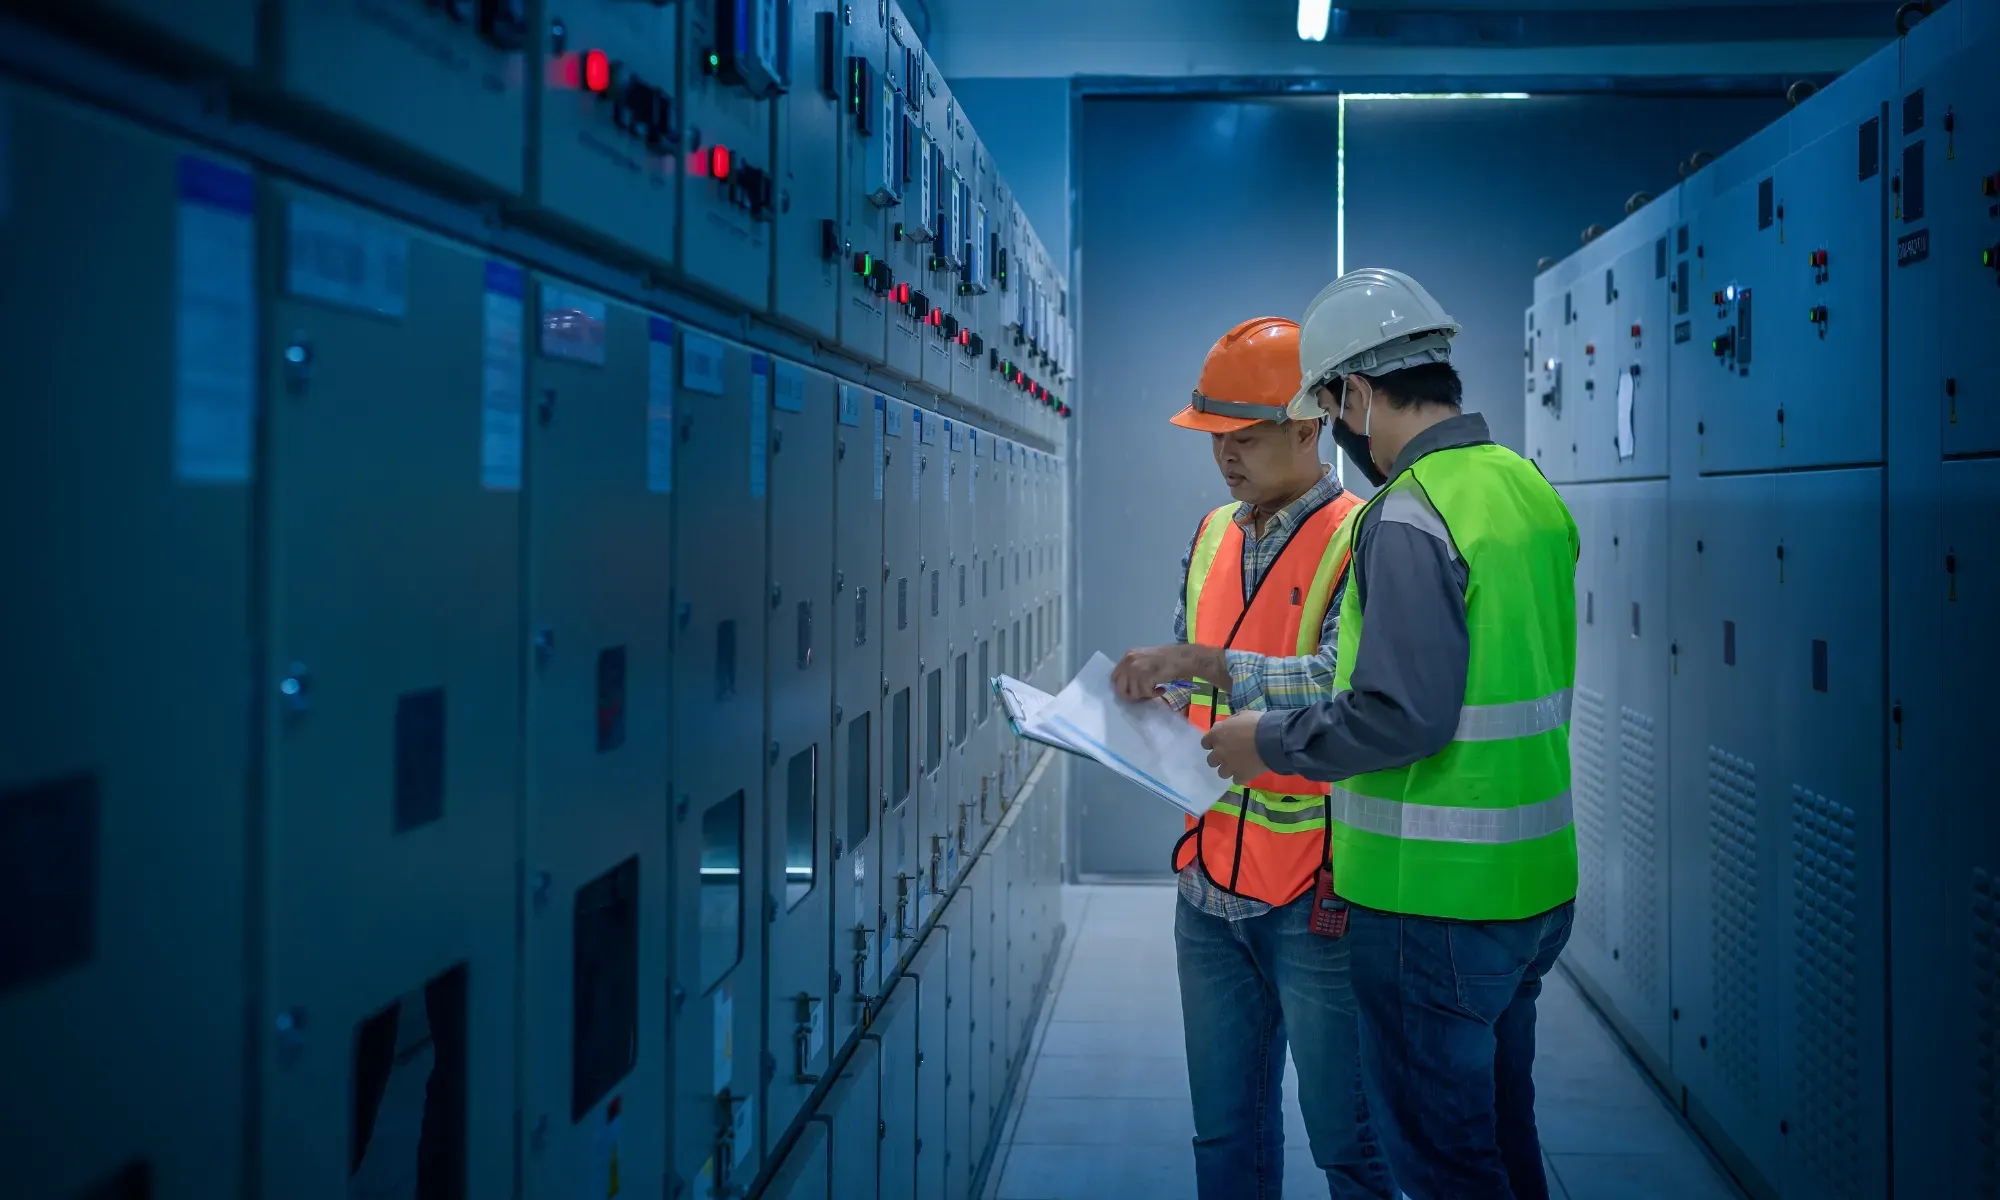 Watch Managing Safety Risks in Operational Data Centers 